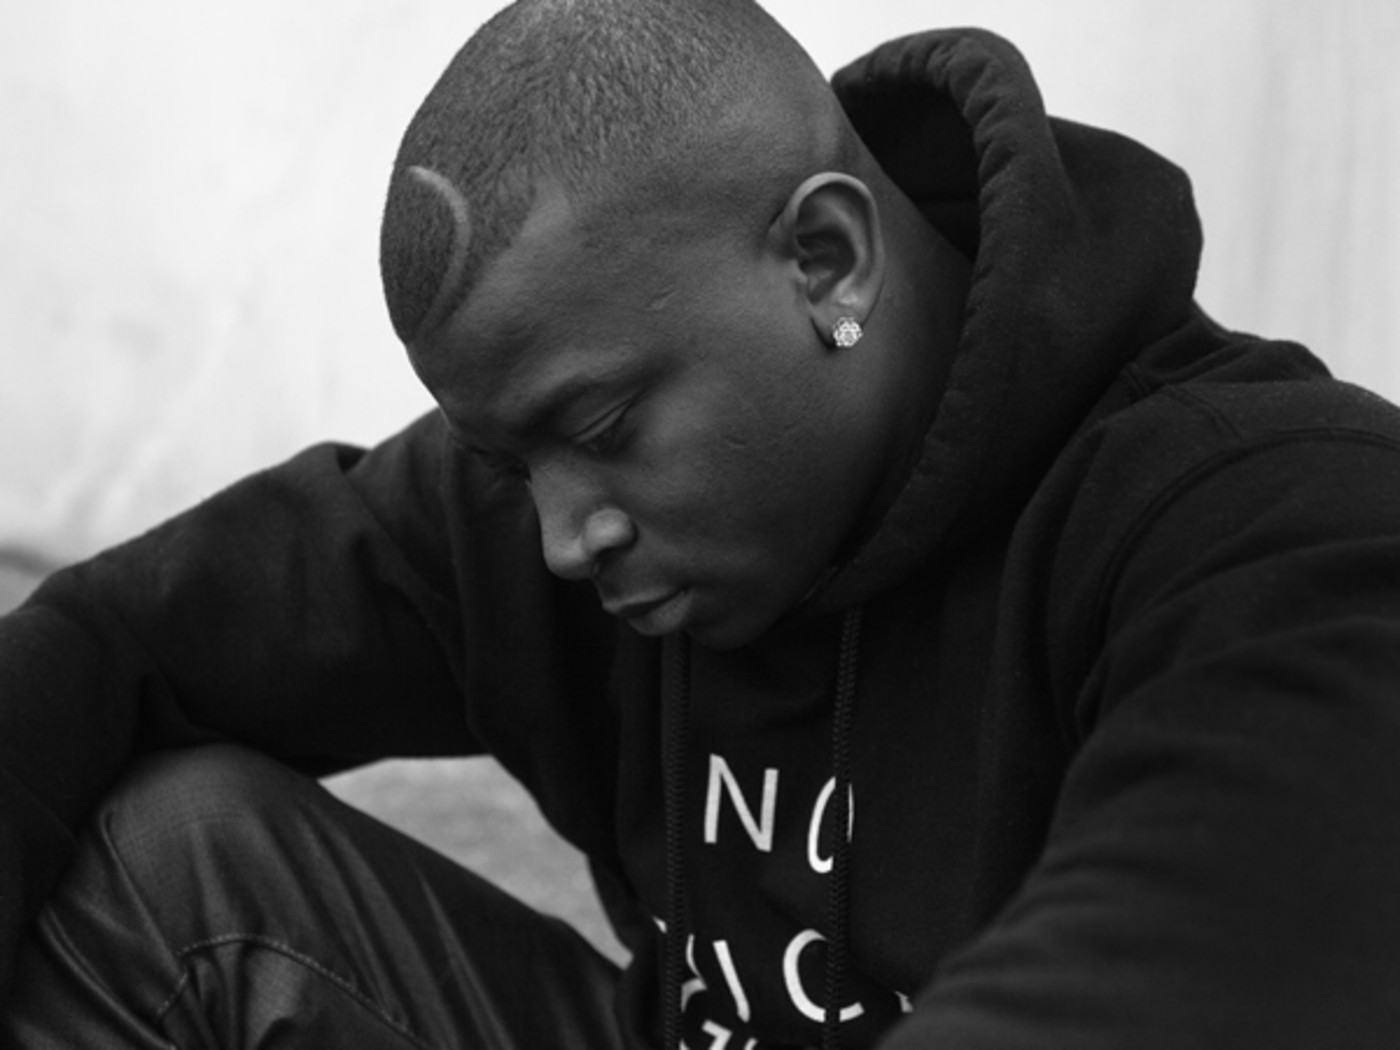 O.T. Genasis - “The Flyest”